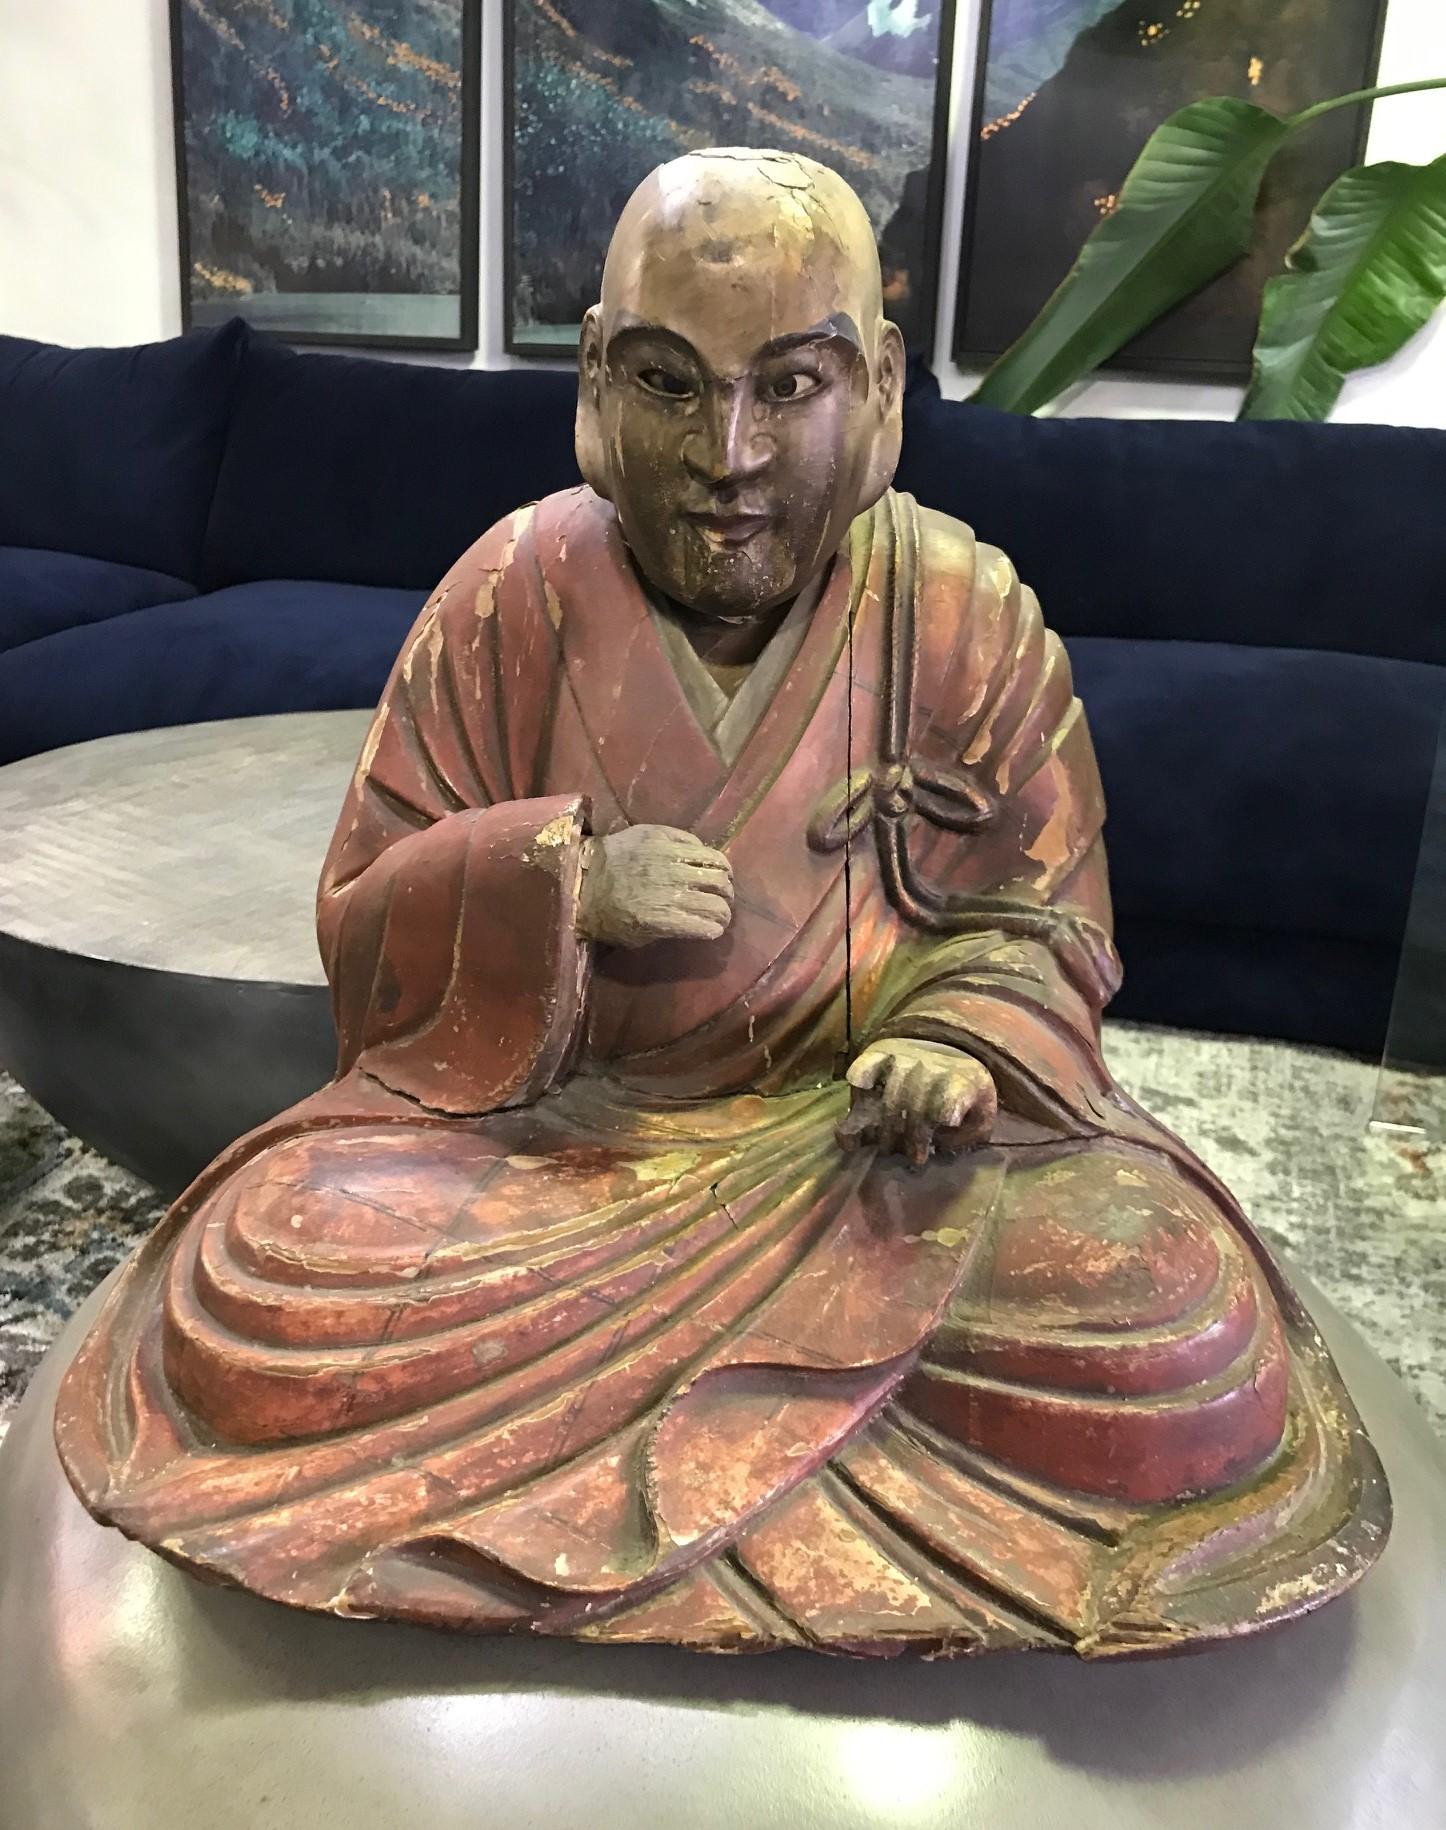 This is truly a wonderful piece with clear age and a nice patina to it. Very unique. We have not seen another quite like it. The monk appears to have glass eyes which gives his expression a very humanistic feel. The head is removable (please see the